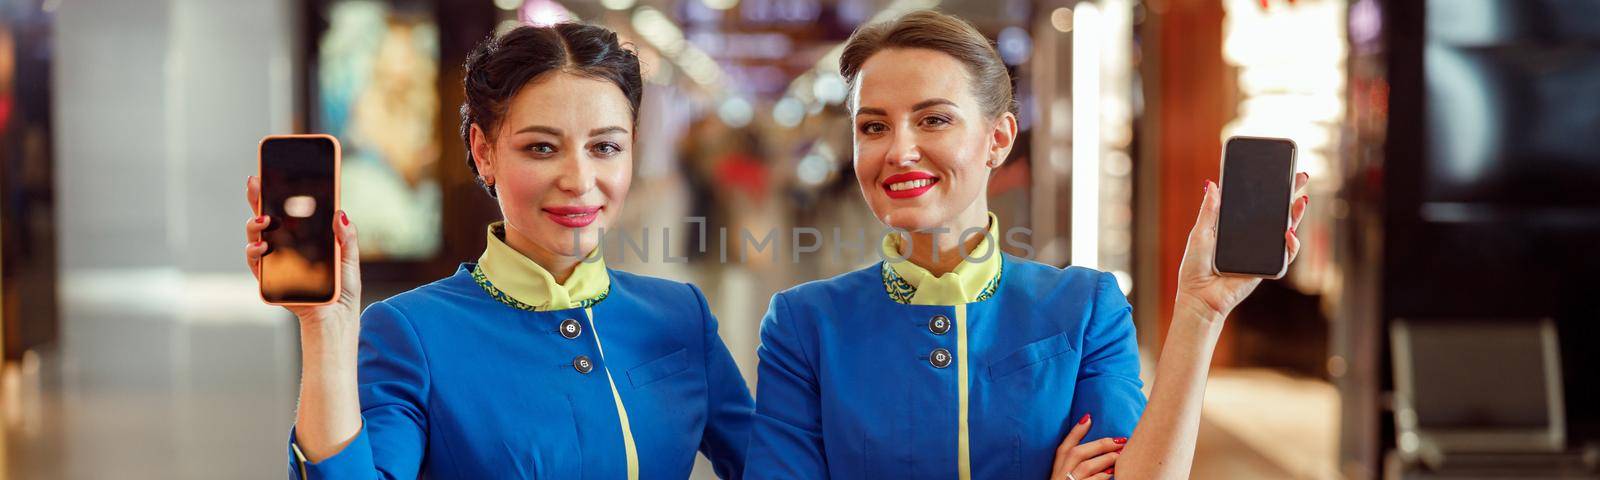 Joyful female flight attendants in aviation air hostess uniform looking at camera and smiling while holding mobile phones